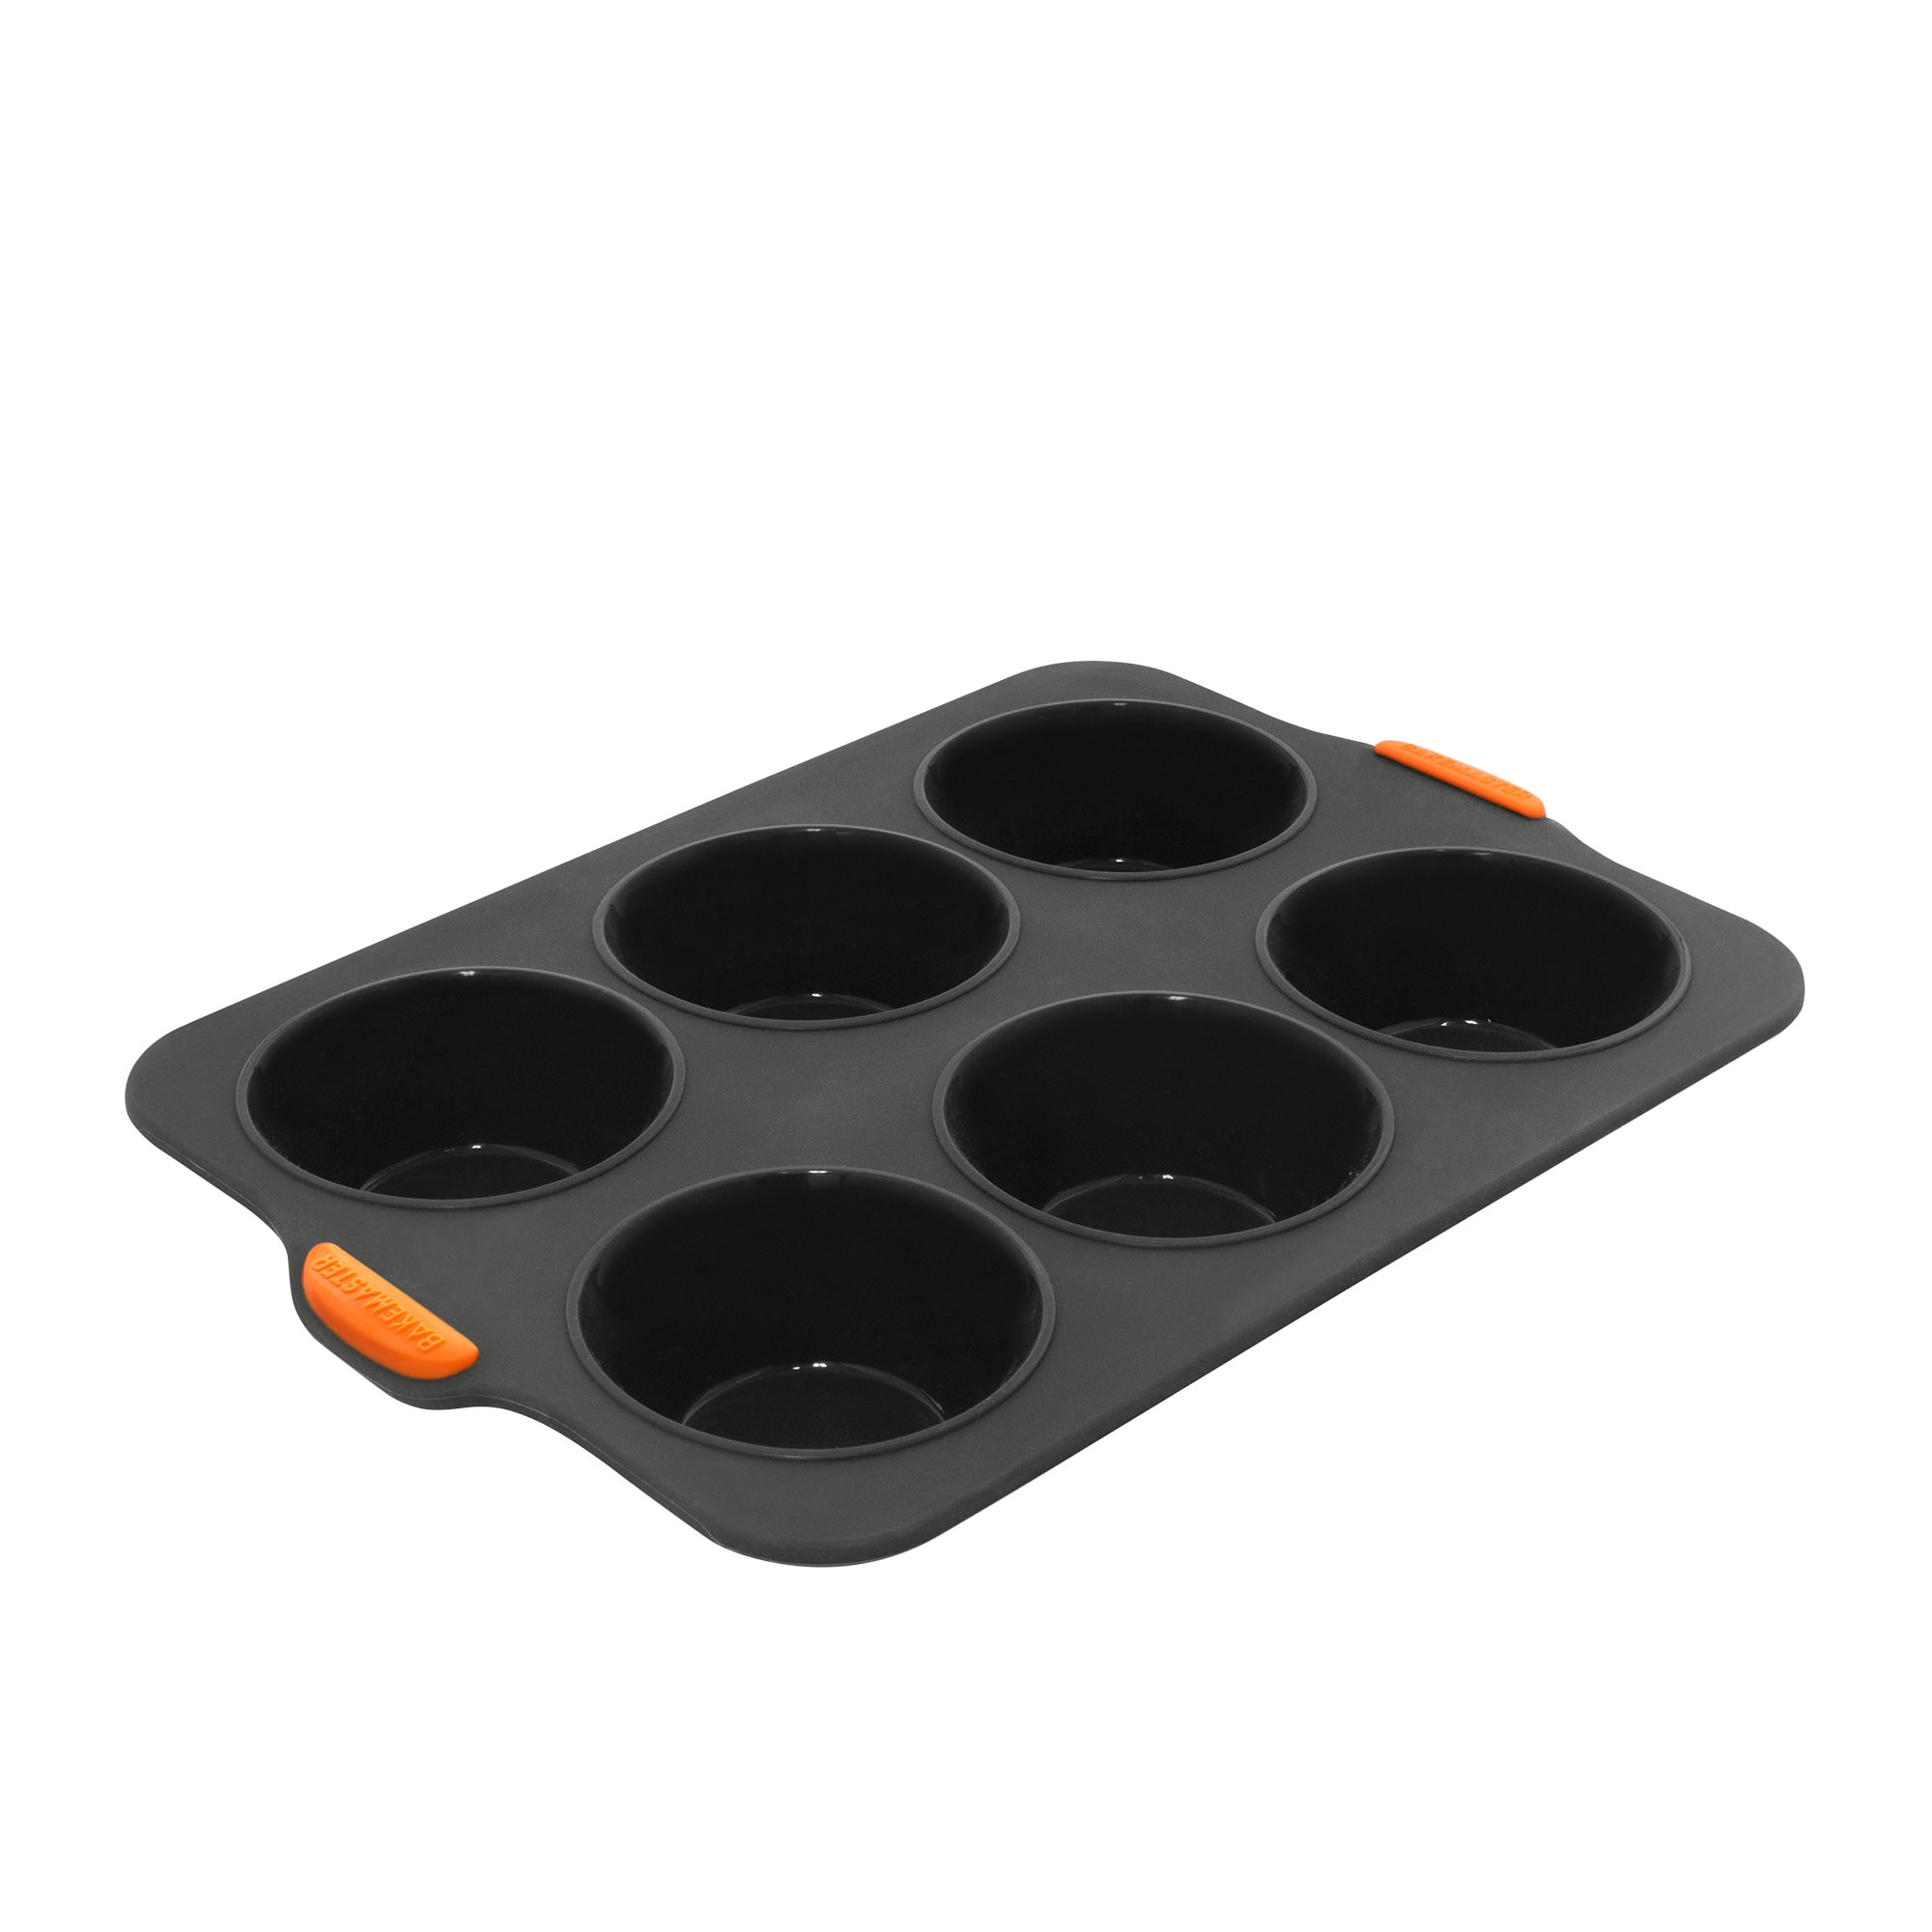 Bakemaster Silicone Large Muffin Pan 6 Cup Image 1